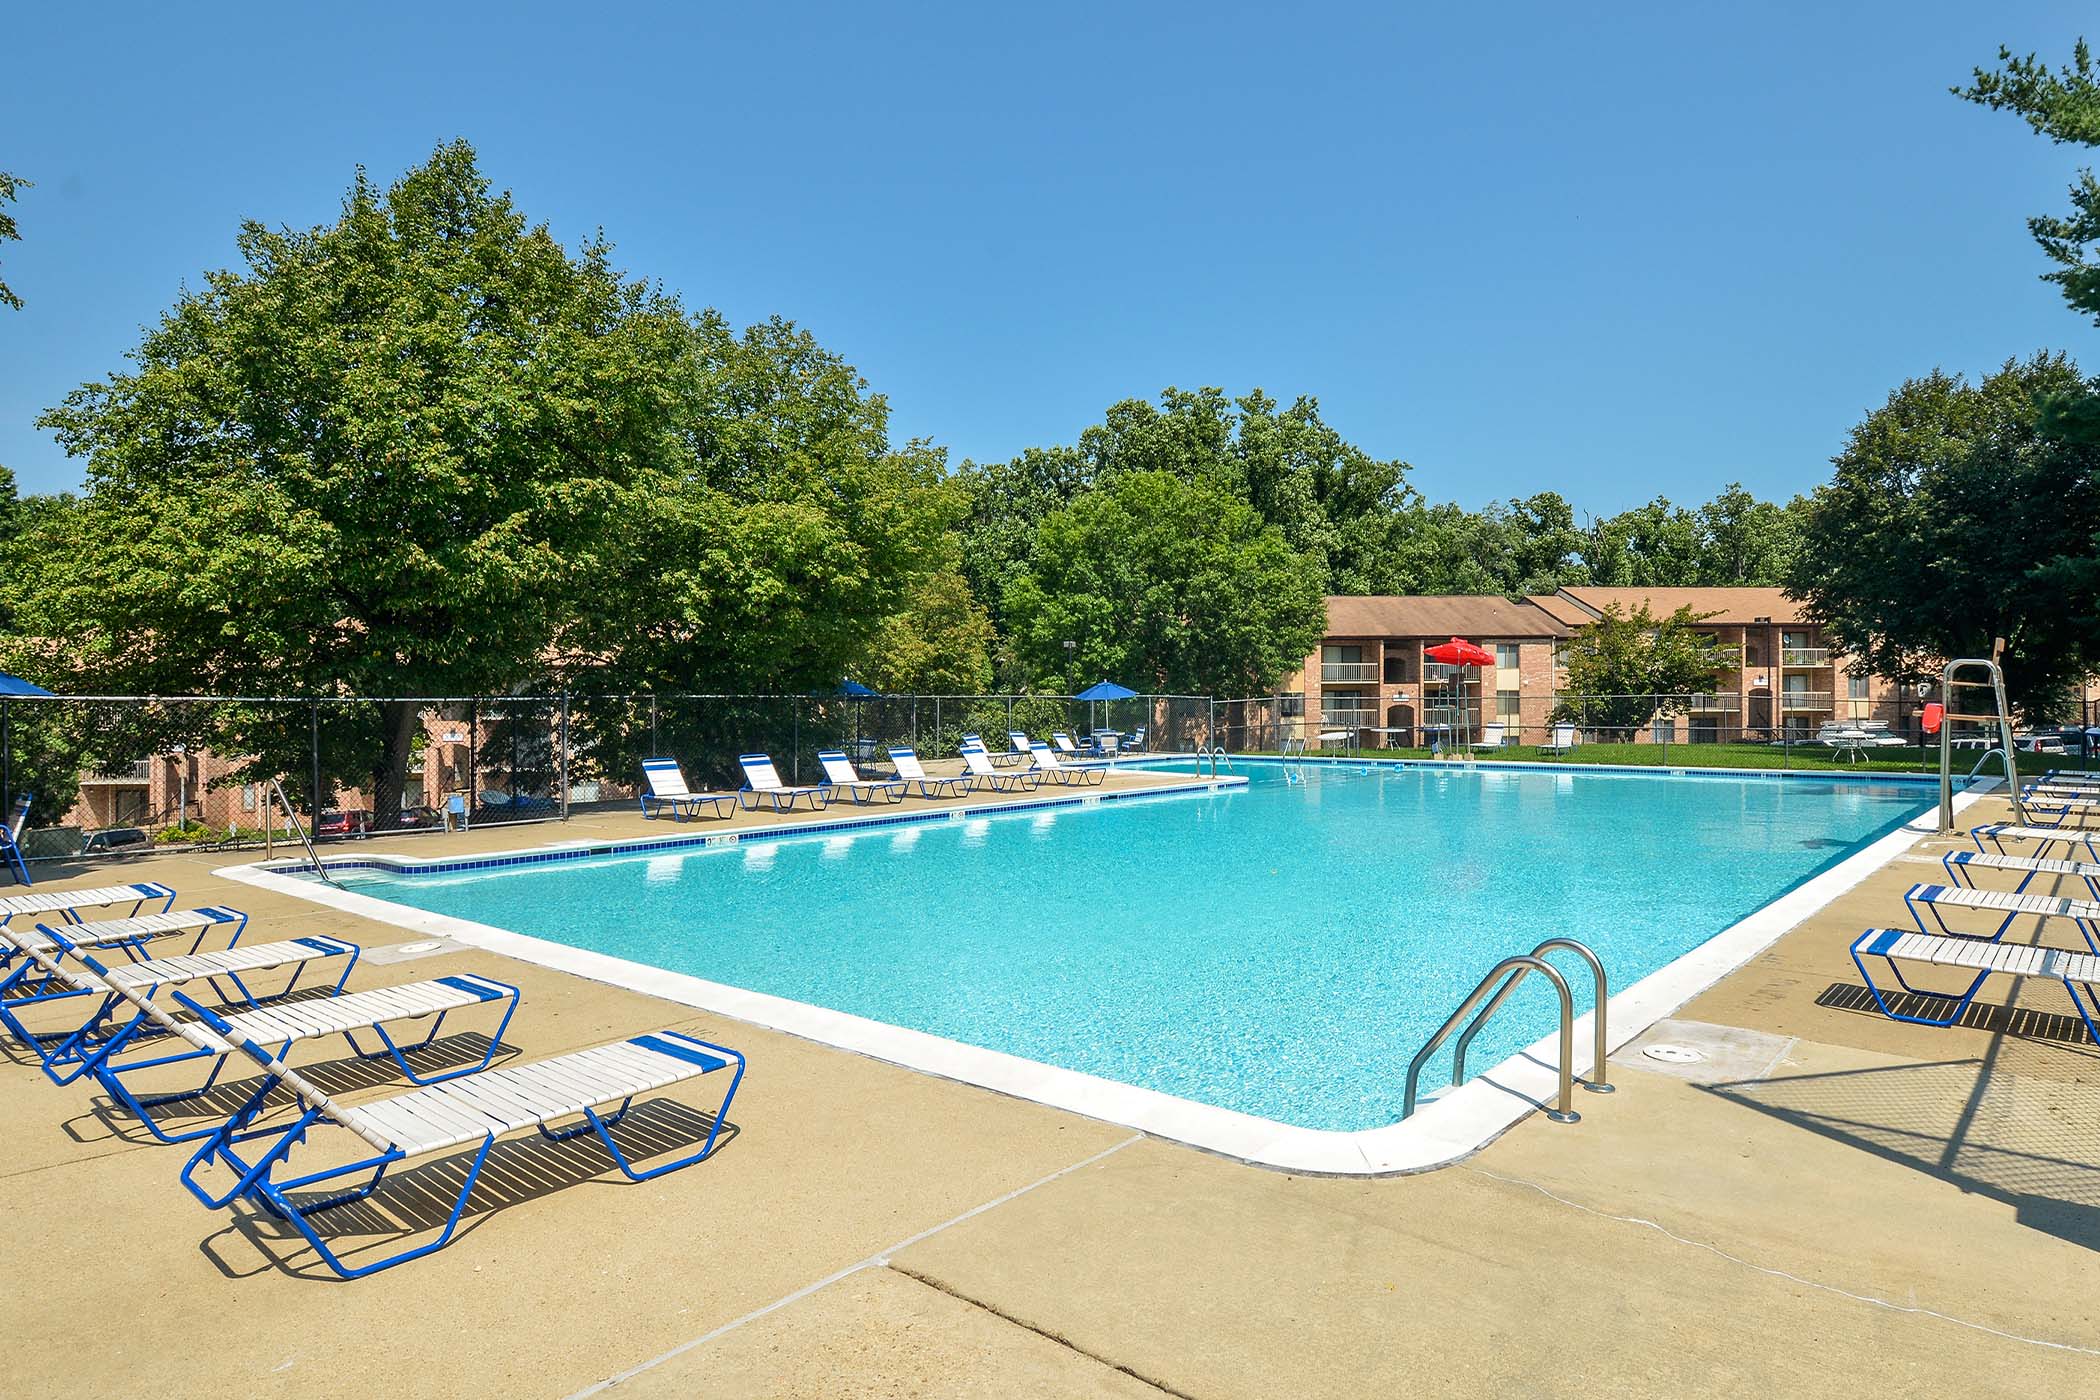 On-site swimming pool at The Flats at Columbia Pike, Silver Spring, Maryland